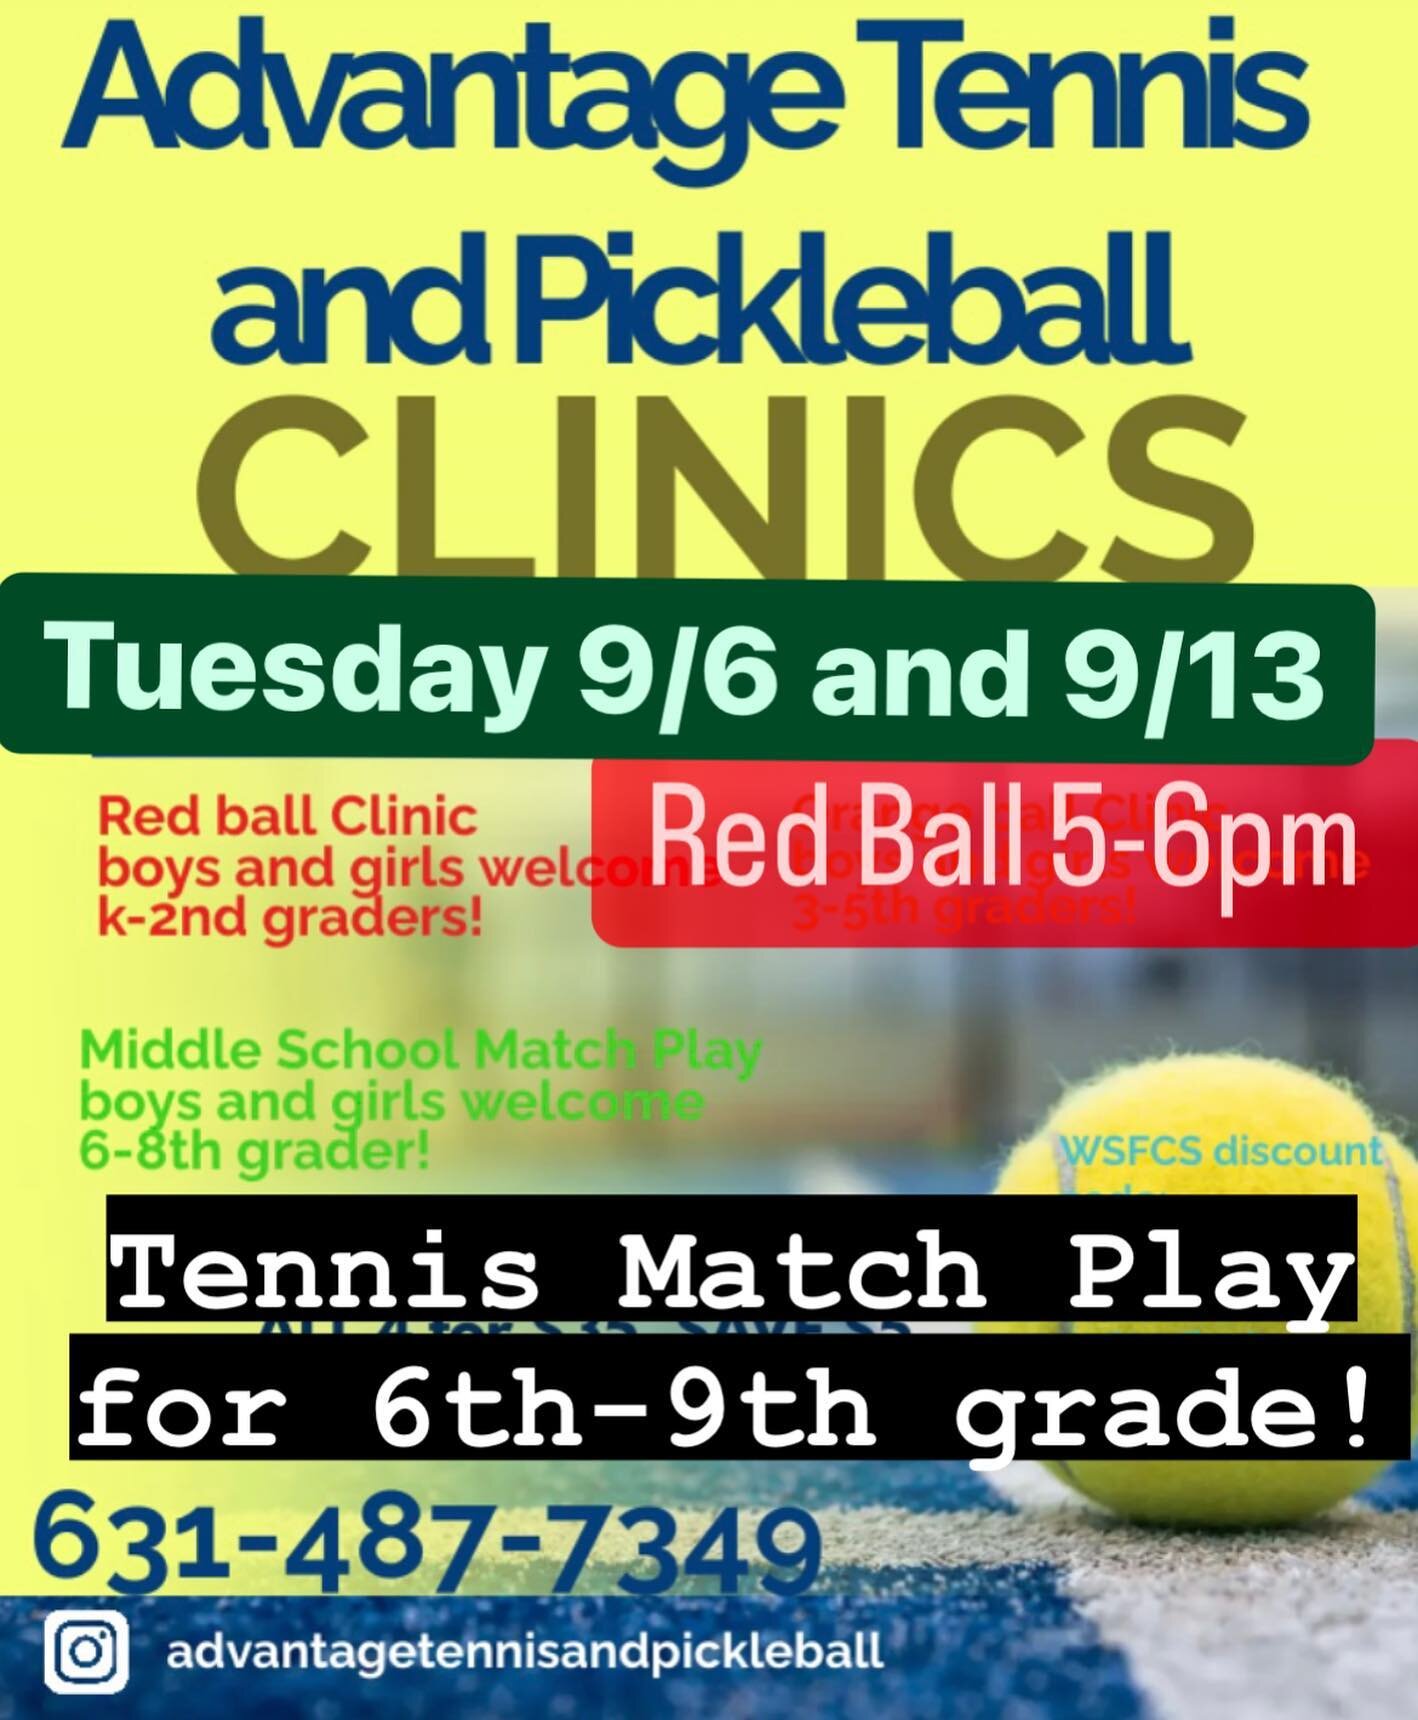 Fall Clinics are back in session! 🎾
.
Sign up! Register now! Join us by going to advantagetennispickleball.com
.
Red ball will be 9/6 and 9/13 from 5-6 pm for kids aged 4-8yo
.
Tennis Match Play Tuesday is also 9/6 and 9/13 from 6-7:30pm for kids 10